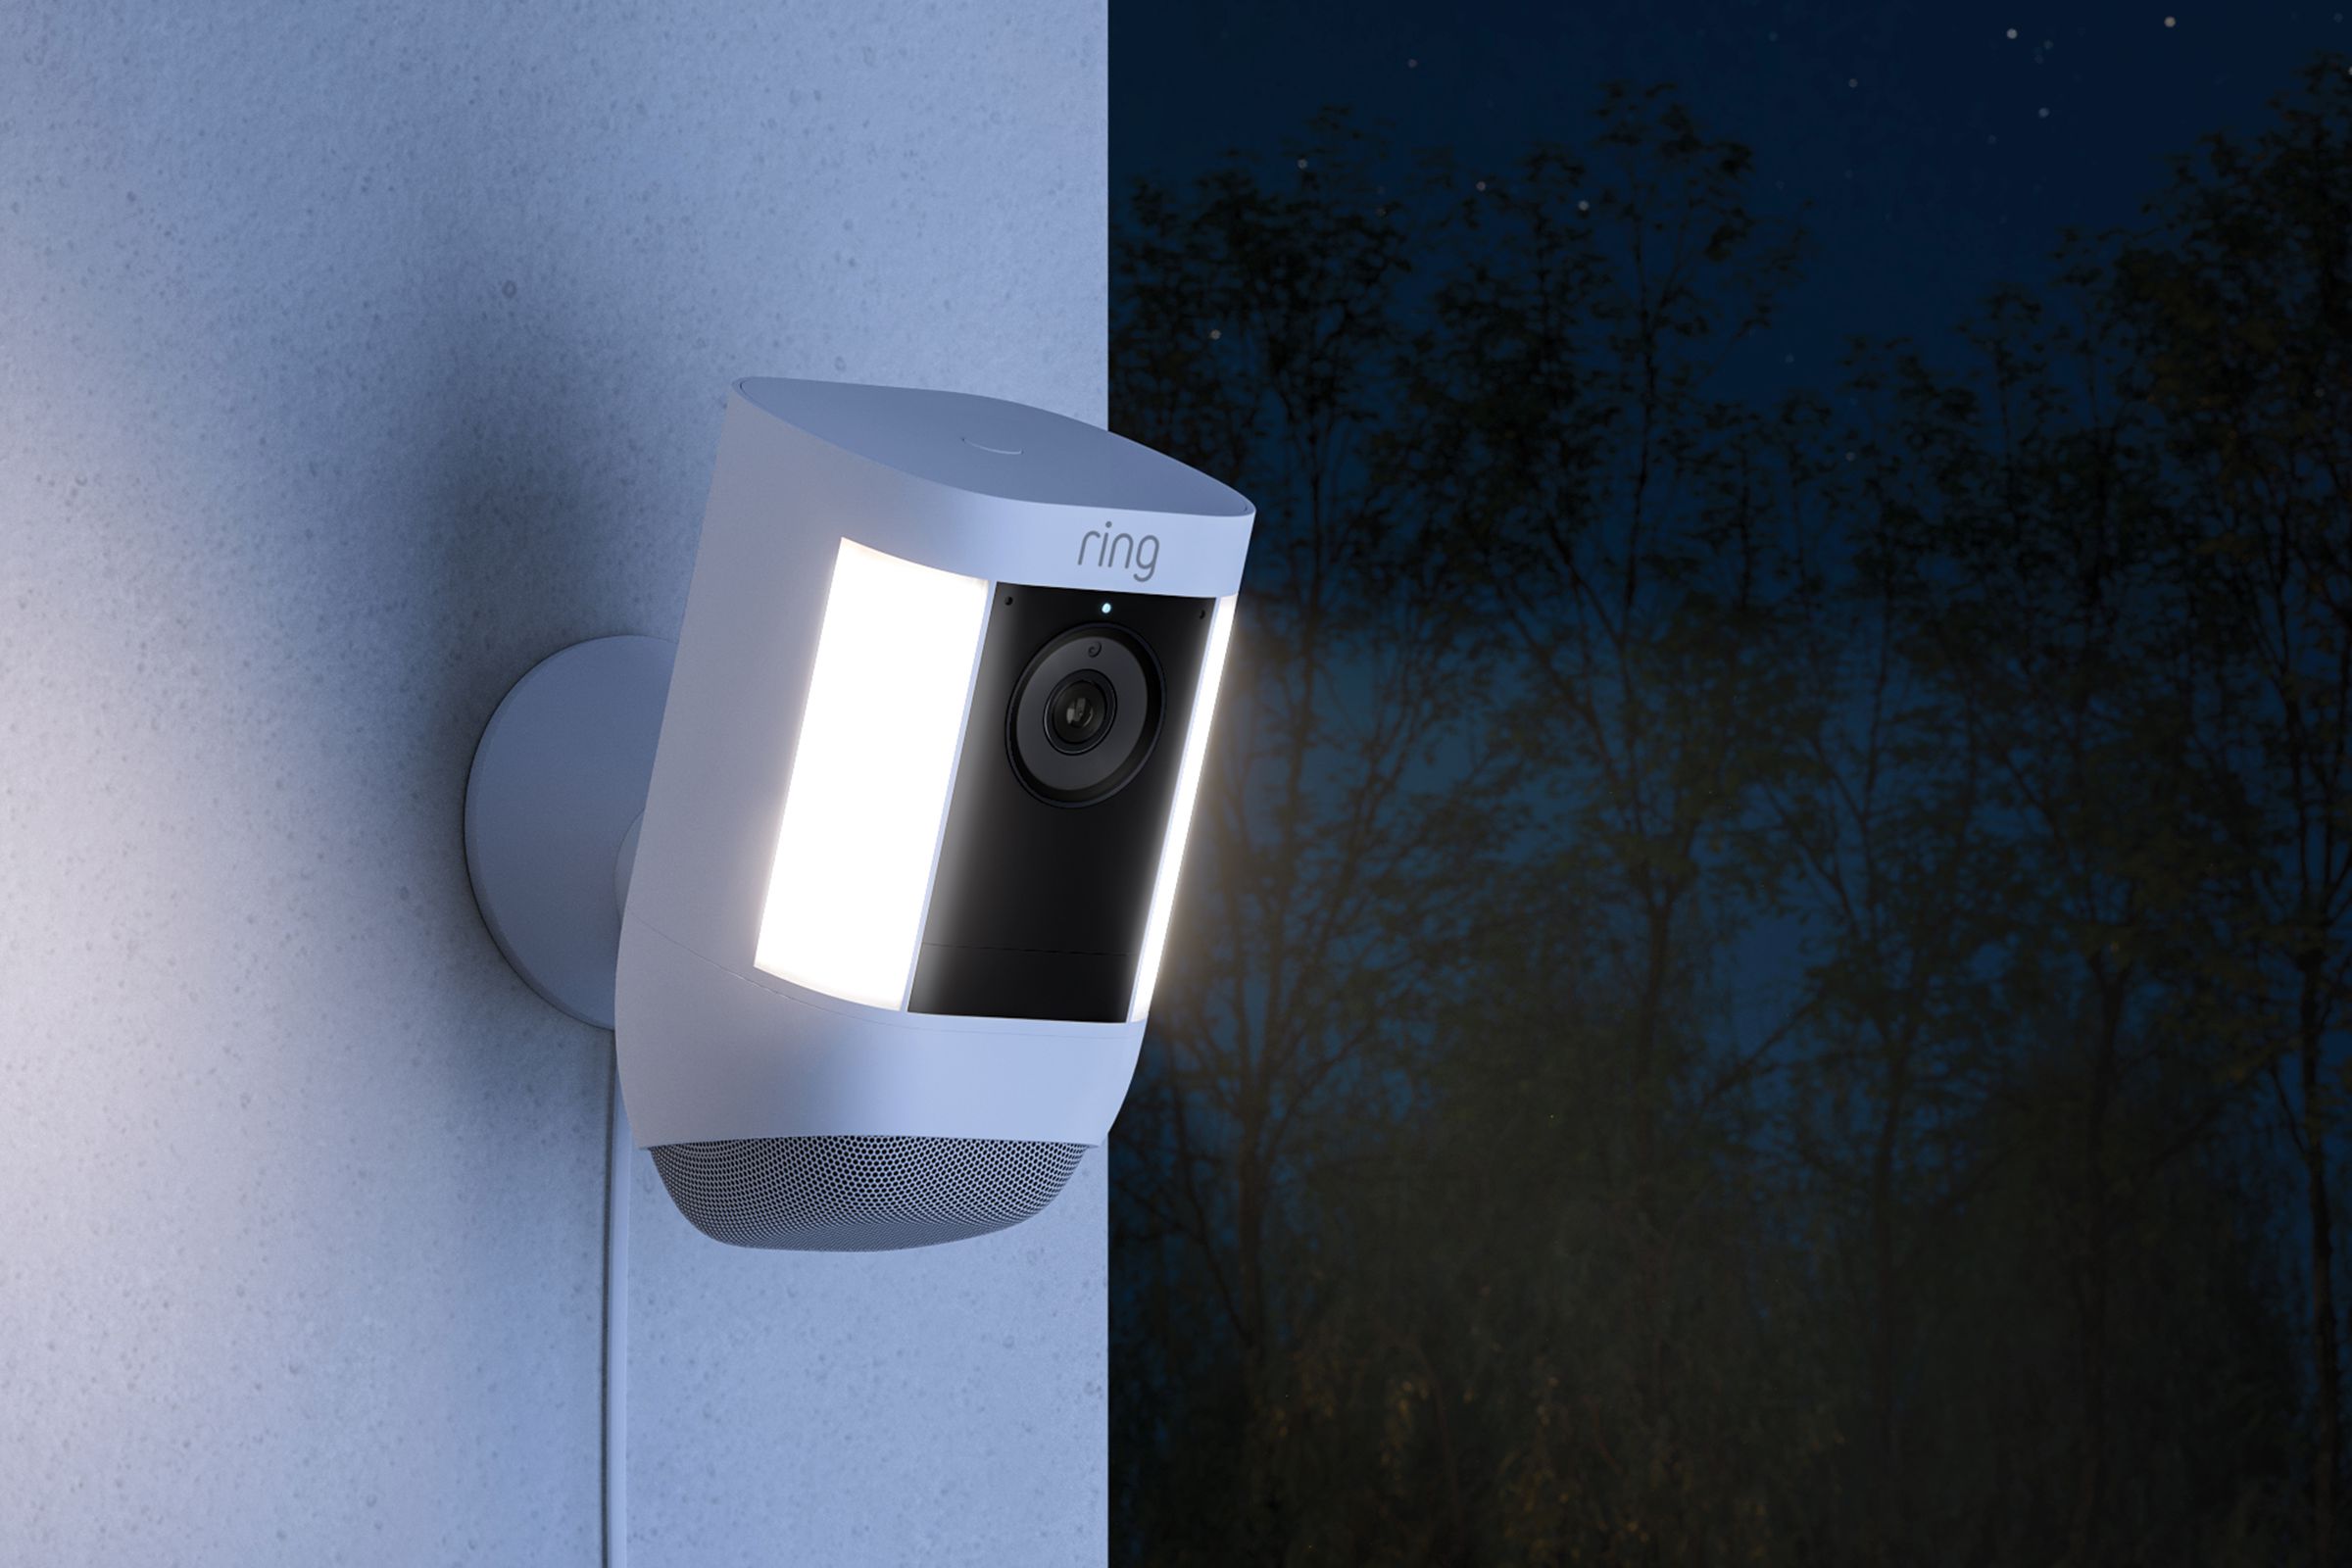 Ring’s spotlight camera is installed on an outdoor white wall with a cable running straight down. Off the wall is a dark wooded background, and the camera has two lights on either side of its body on.